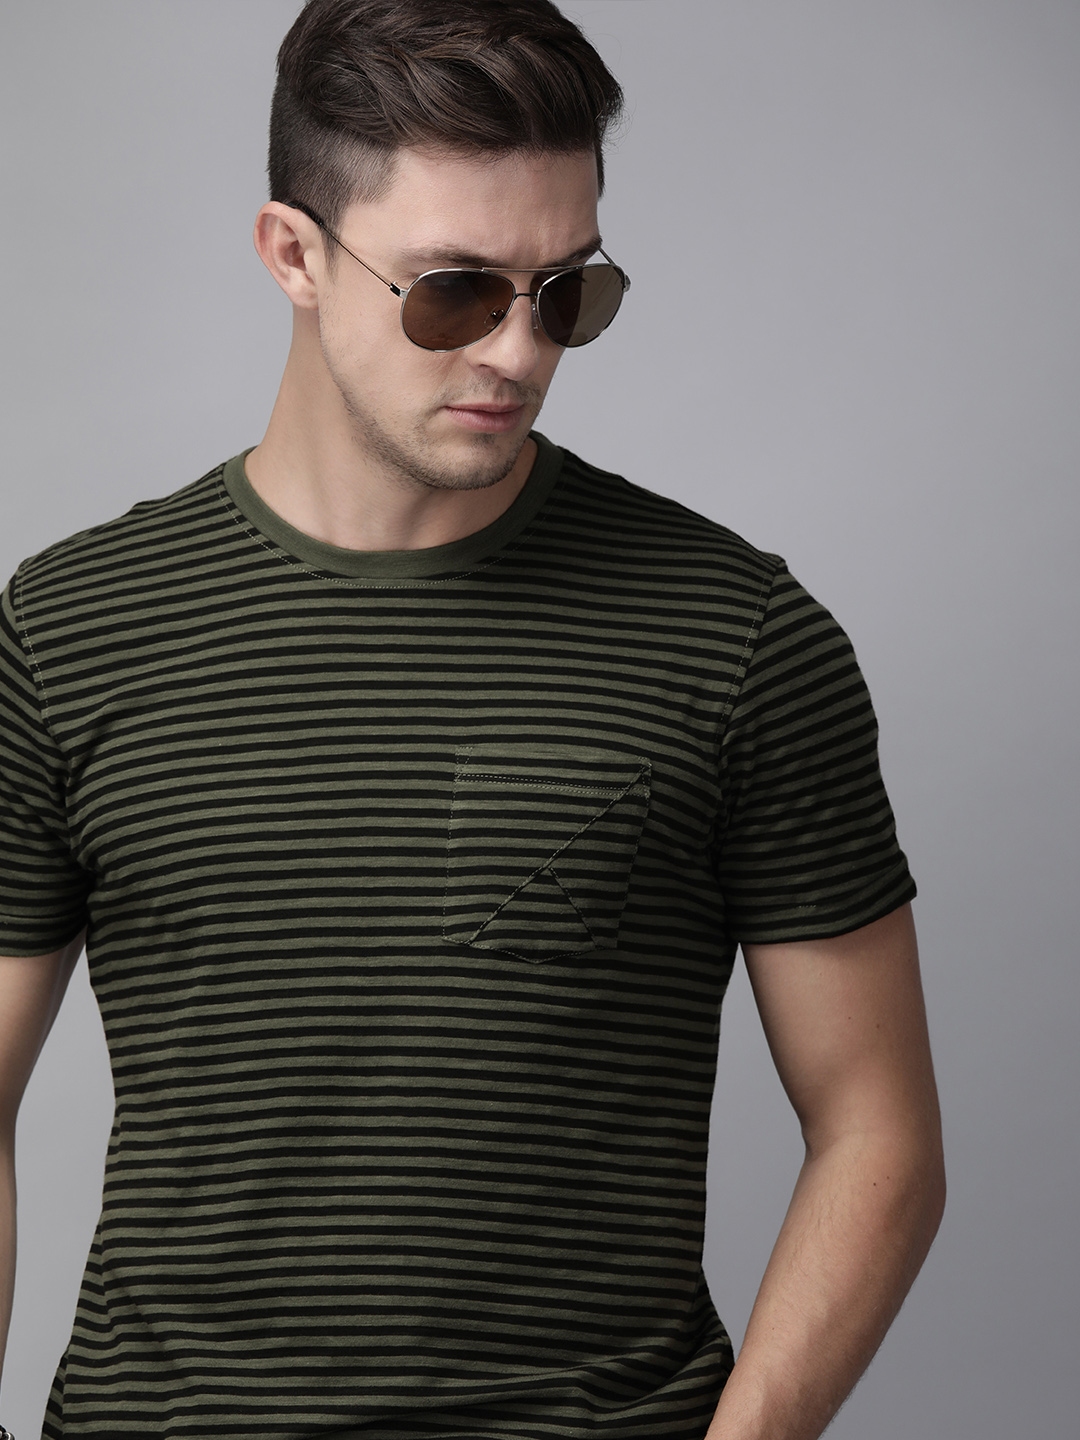 Buy The Roadster Lifestyle Co Men Olive Black Green Striped Round Neck ...